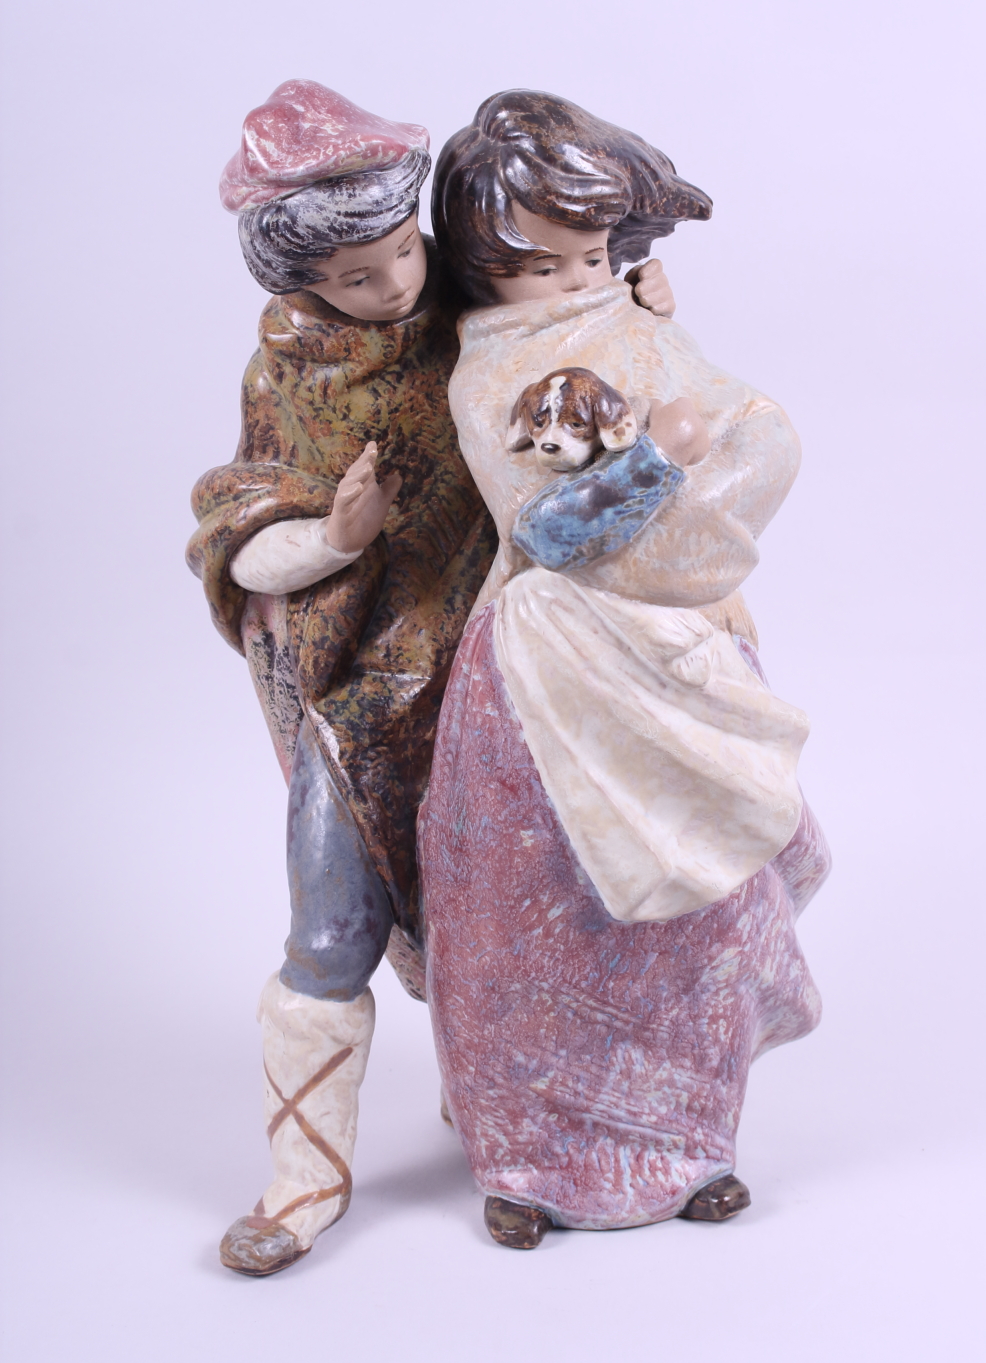 A Lladro Gres figure group of a young boy and girl holding a small dog, 13 12" high